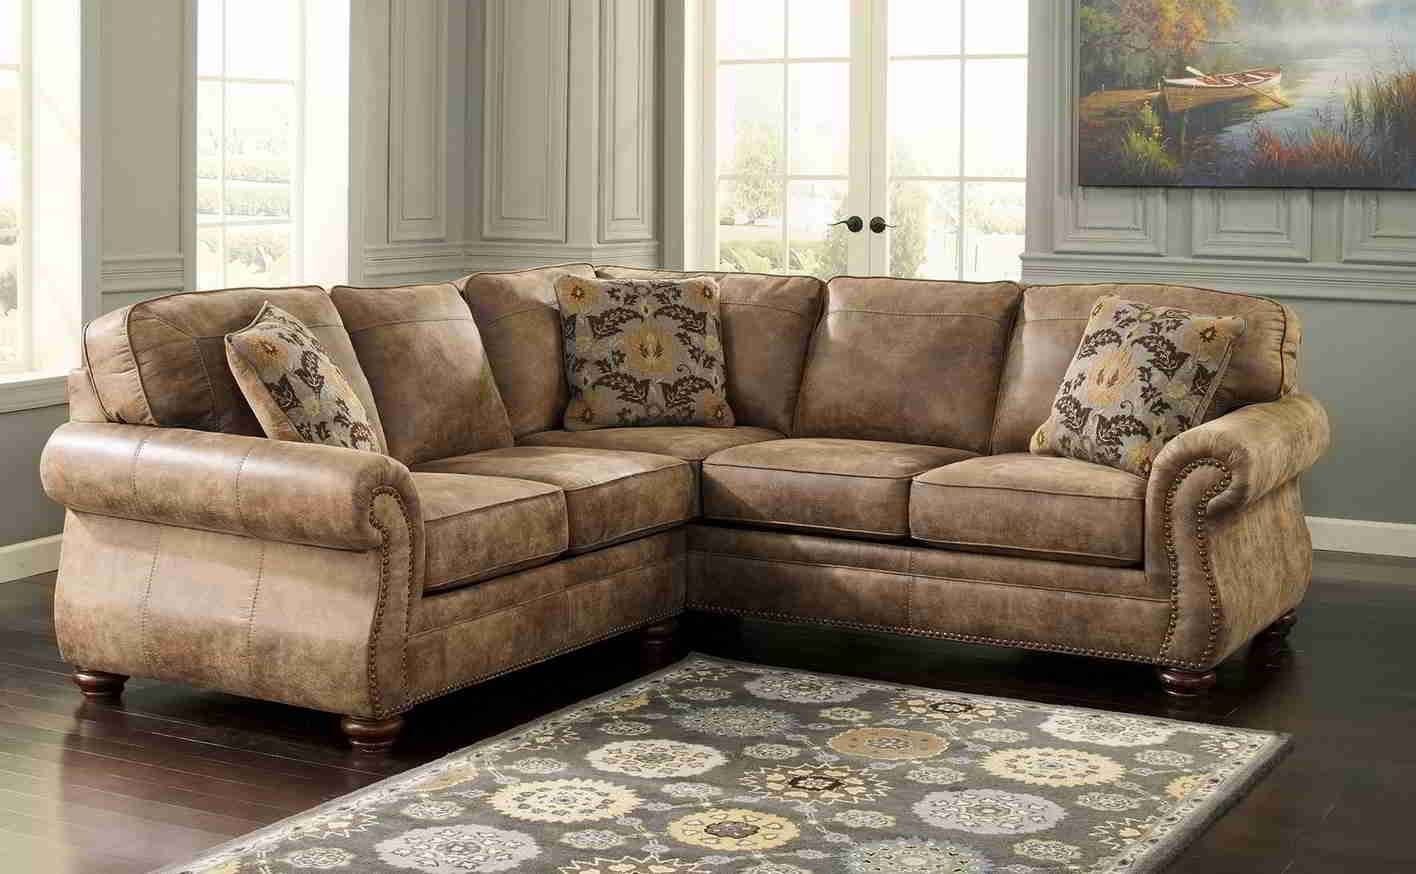 Beautiful Wide Seat Sectional Sofas 33 About Remodel Bradley With Bradley Sectional Sofa (View 7 of 30)